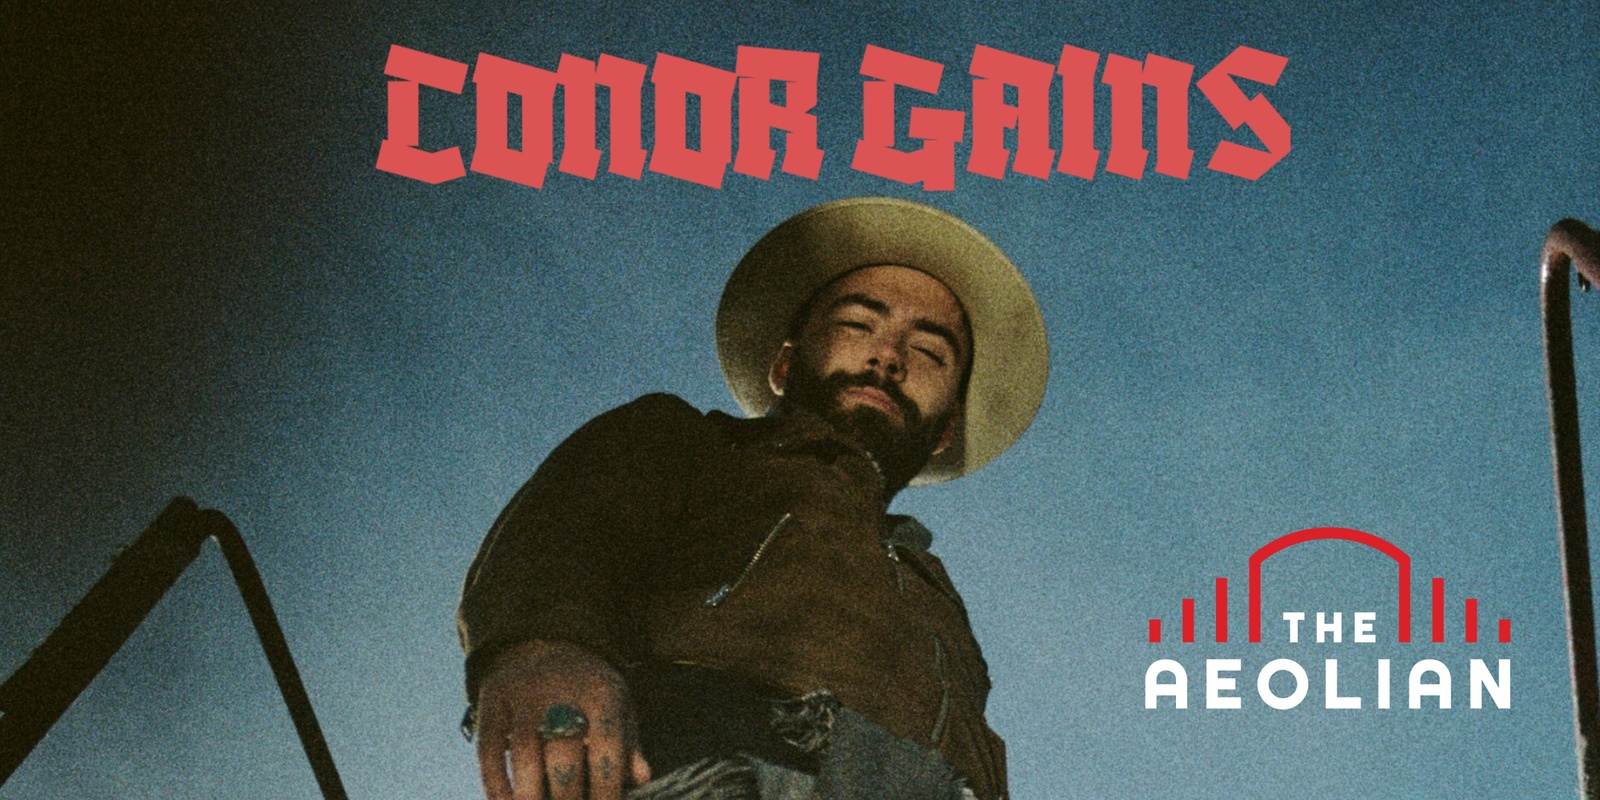 Banner image for Conor Gains